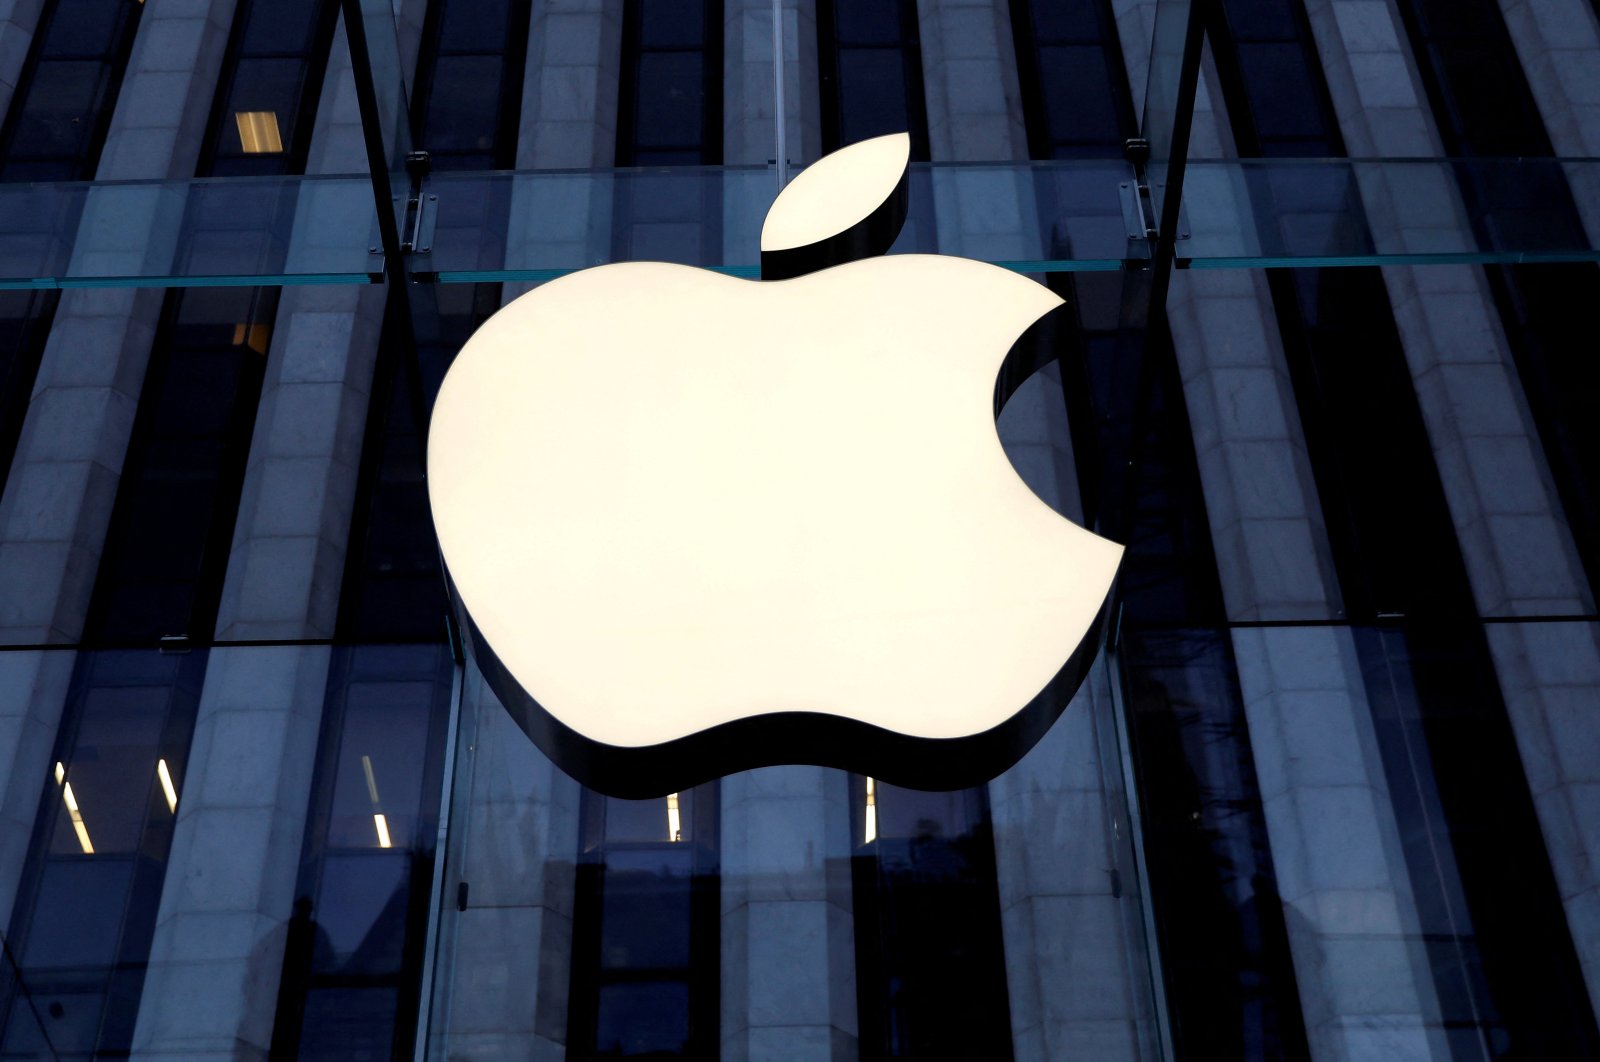 The Apple logo is seen hanging at the entrance to the Apple store on 5th Avenue in Manhattan, New York, U.S., Oct. 16, 2019. (Reuters Photo)